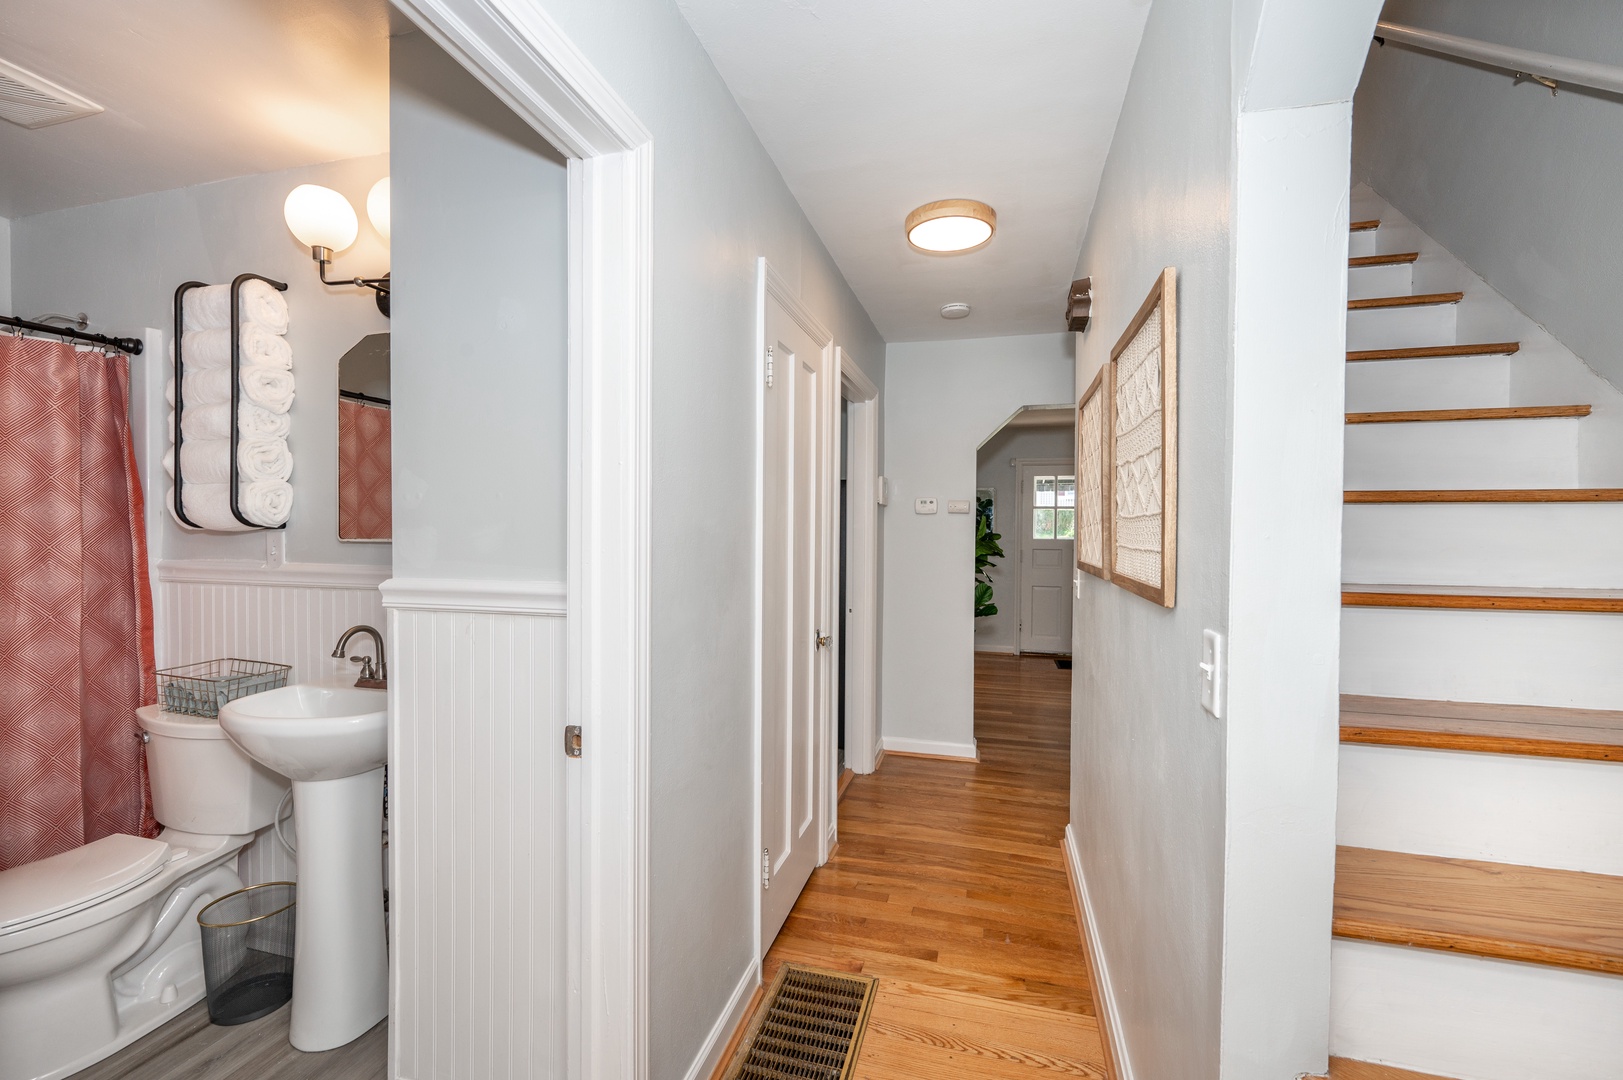 A central hallway connects the Living Spaces, Stairway, and 1st Floor Bathroom